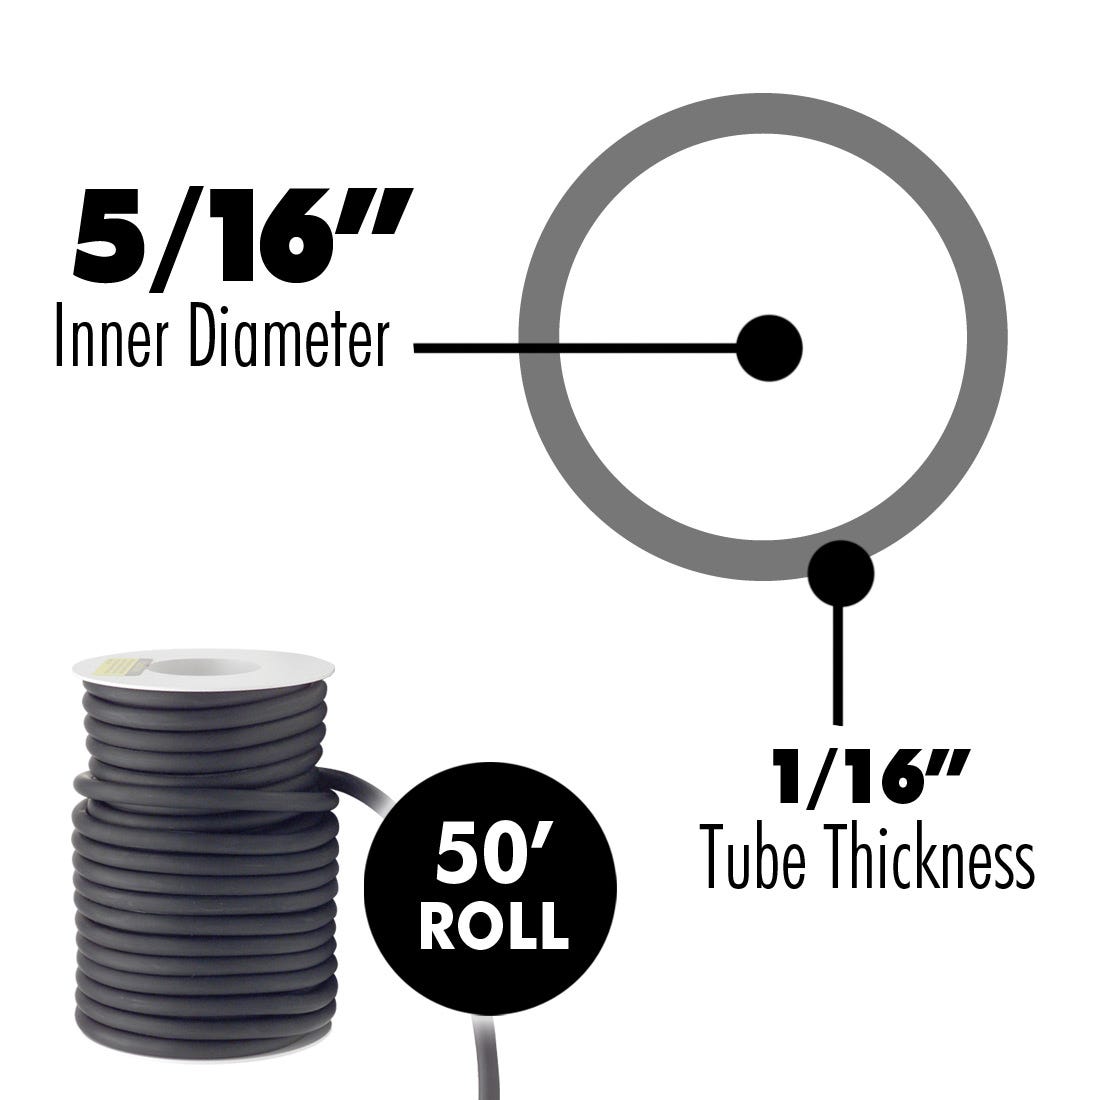 ACE Latex Rubber Tubing Black, 5/16" x 1/16"- 50' Roll